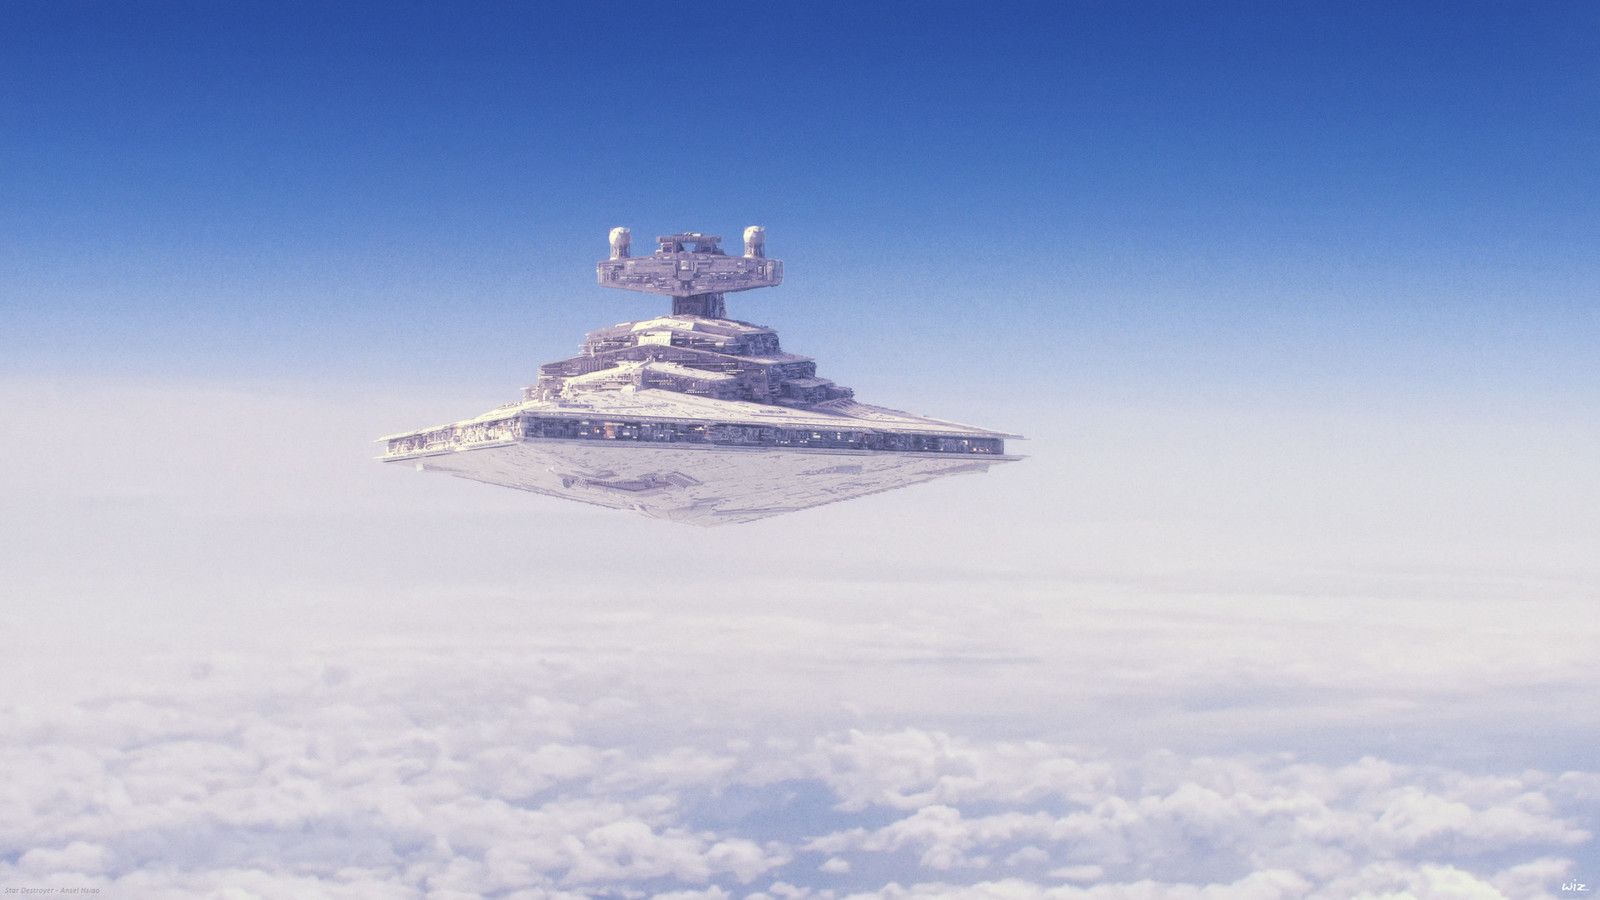 Here is the Star Destroyer shot used in the above cover. 